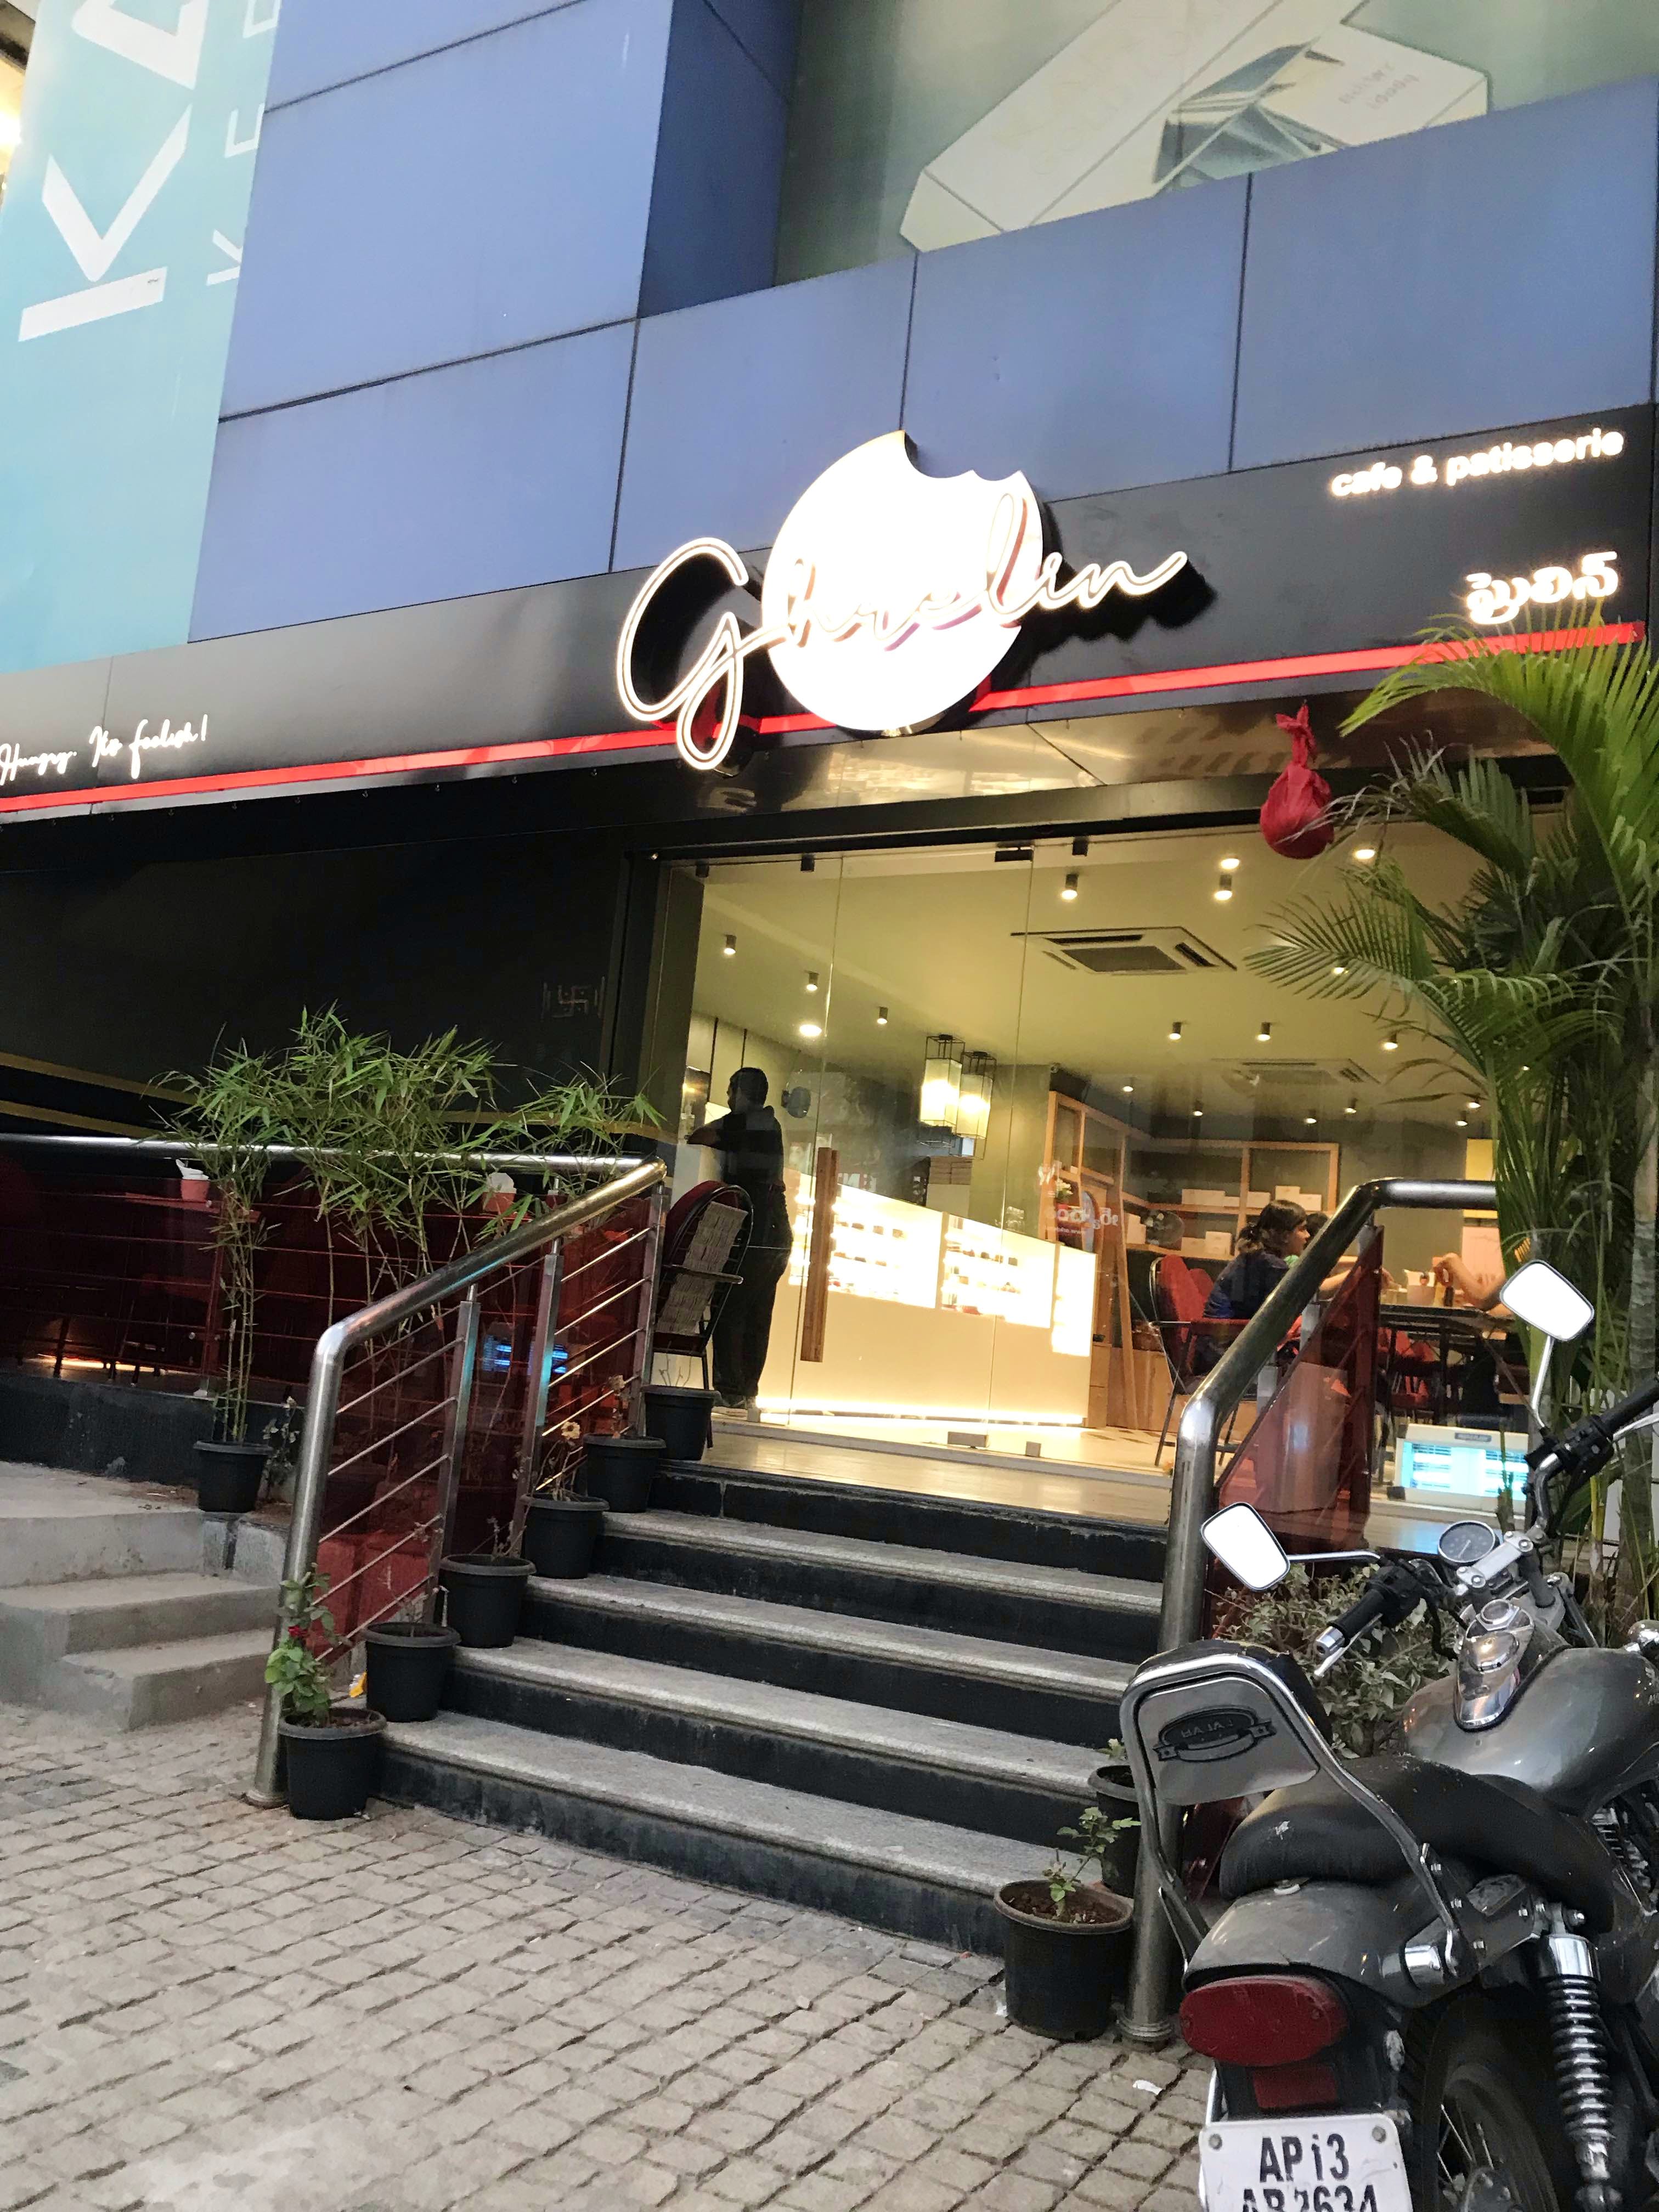 Ghrelin Cafe Has Amazing Cup Cakes.Visit  This Place As It’S An Iconic Cafe In Himayat Nagar